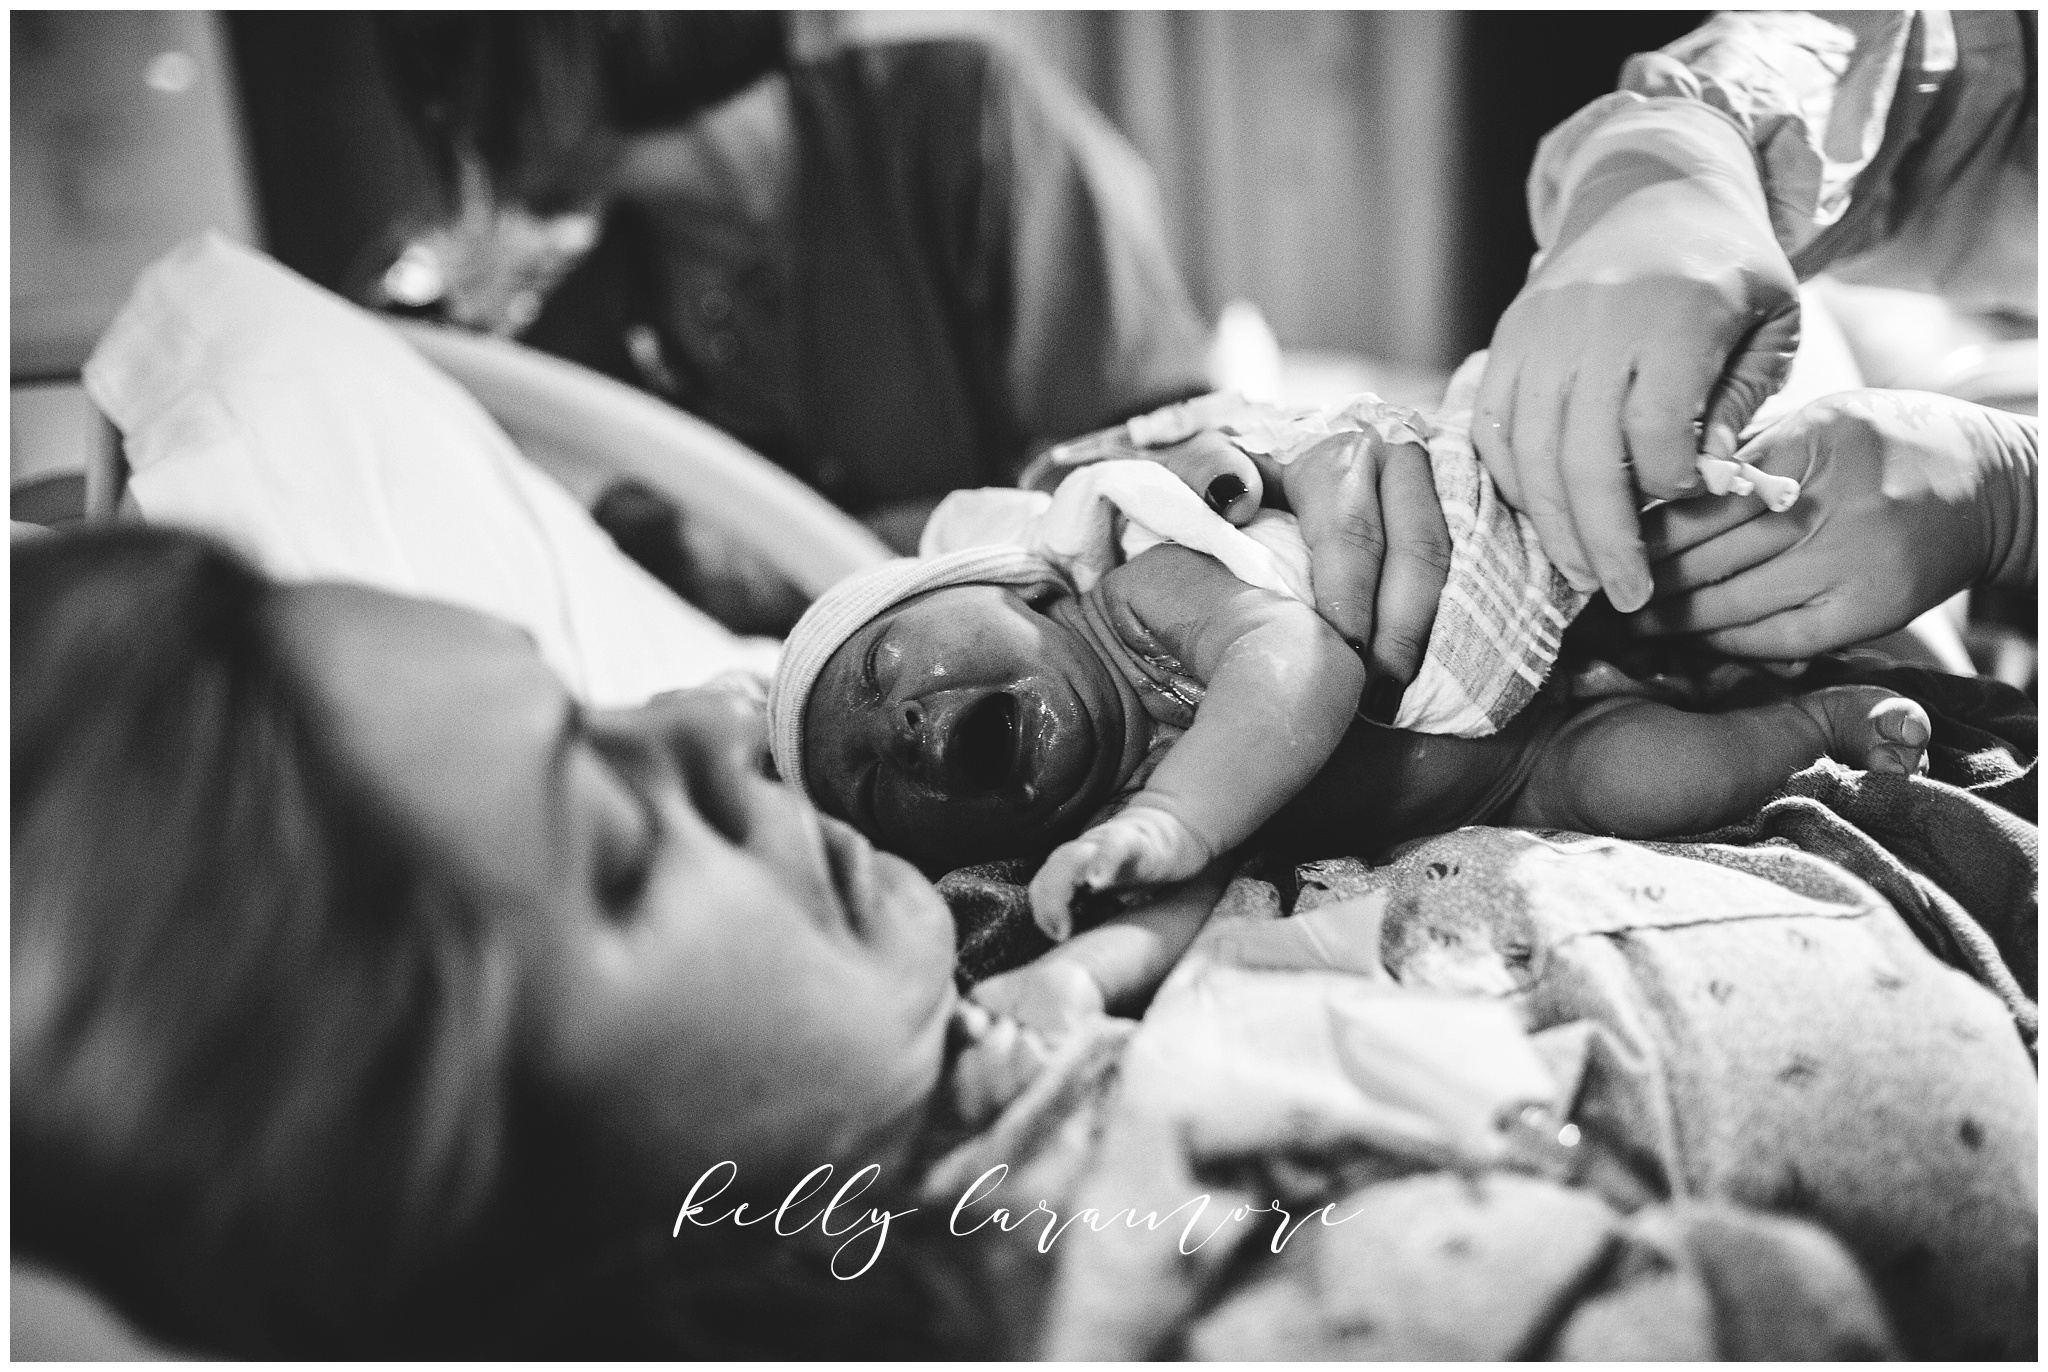 st louis birth story photographer, st louis family photographer, missouri baptist birth center birth, delivery room, baby girl